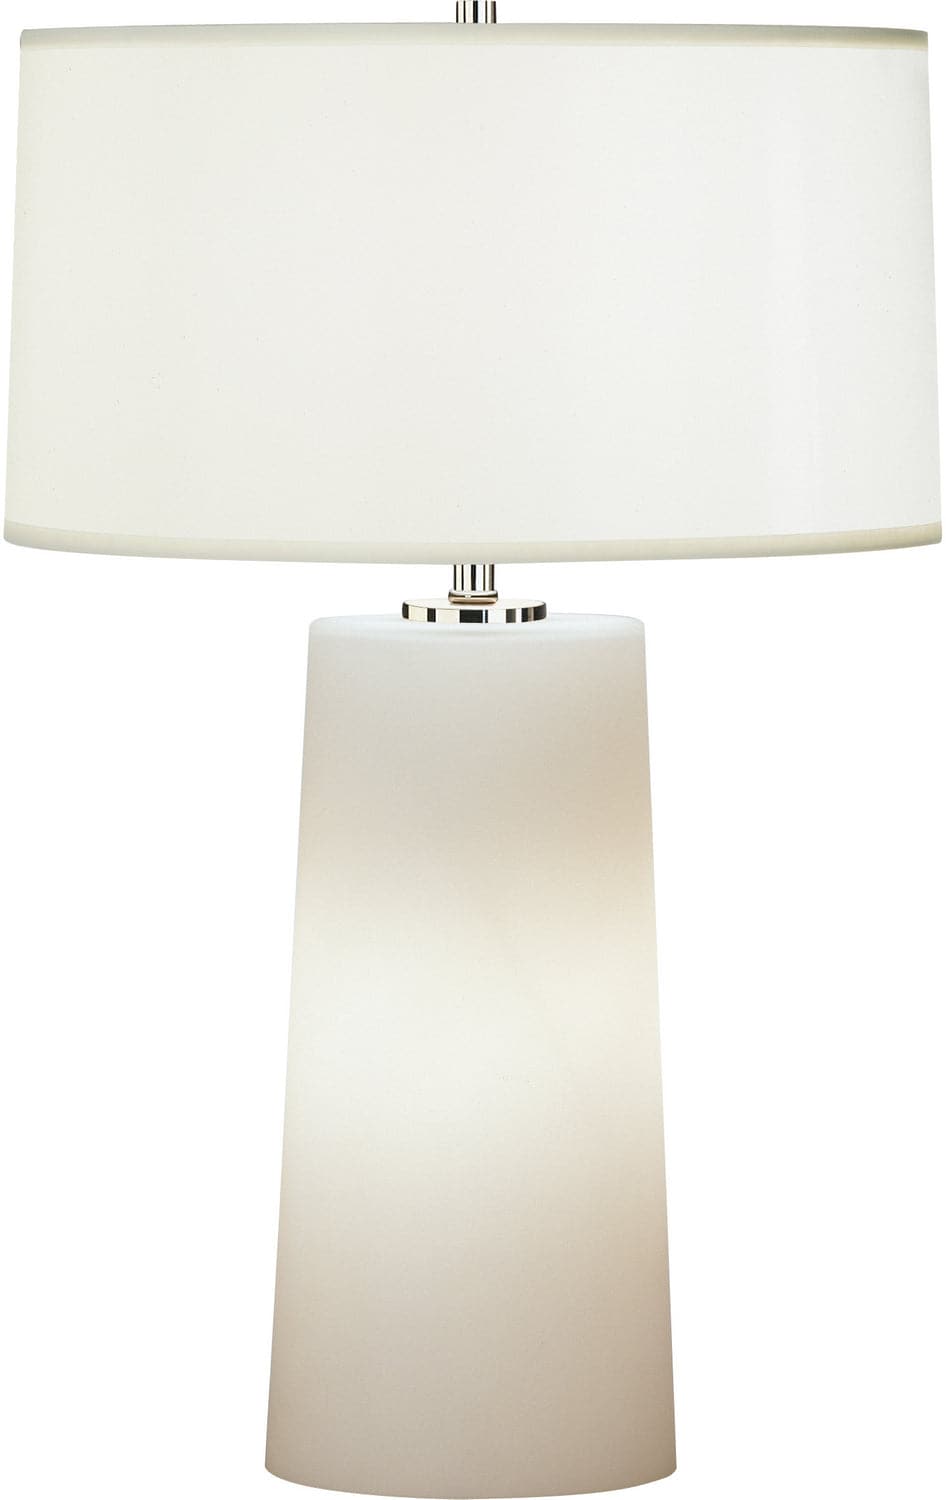 Robert Abbey - 1580W - Two Light Accent Lamp - Rico Espinet Olinda - Frosted White Cased Glass Base w/Night Light